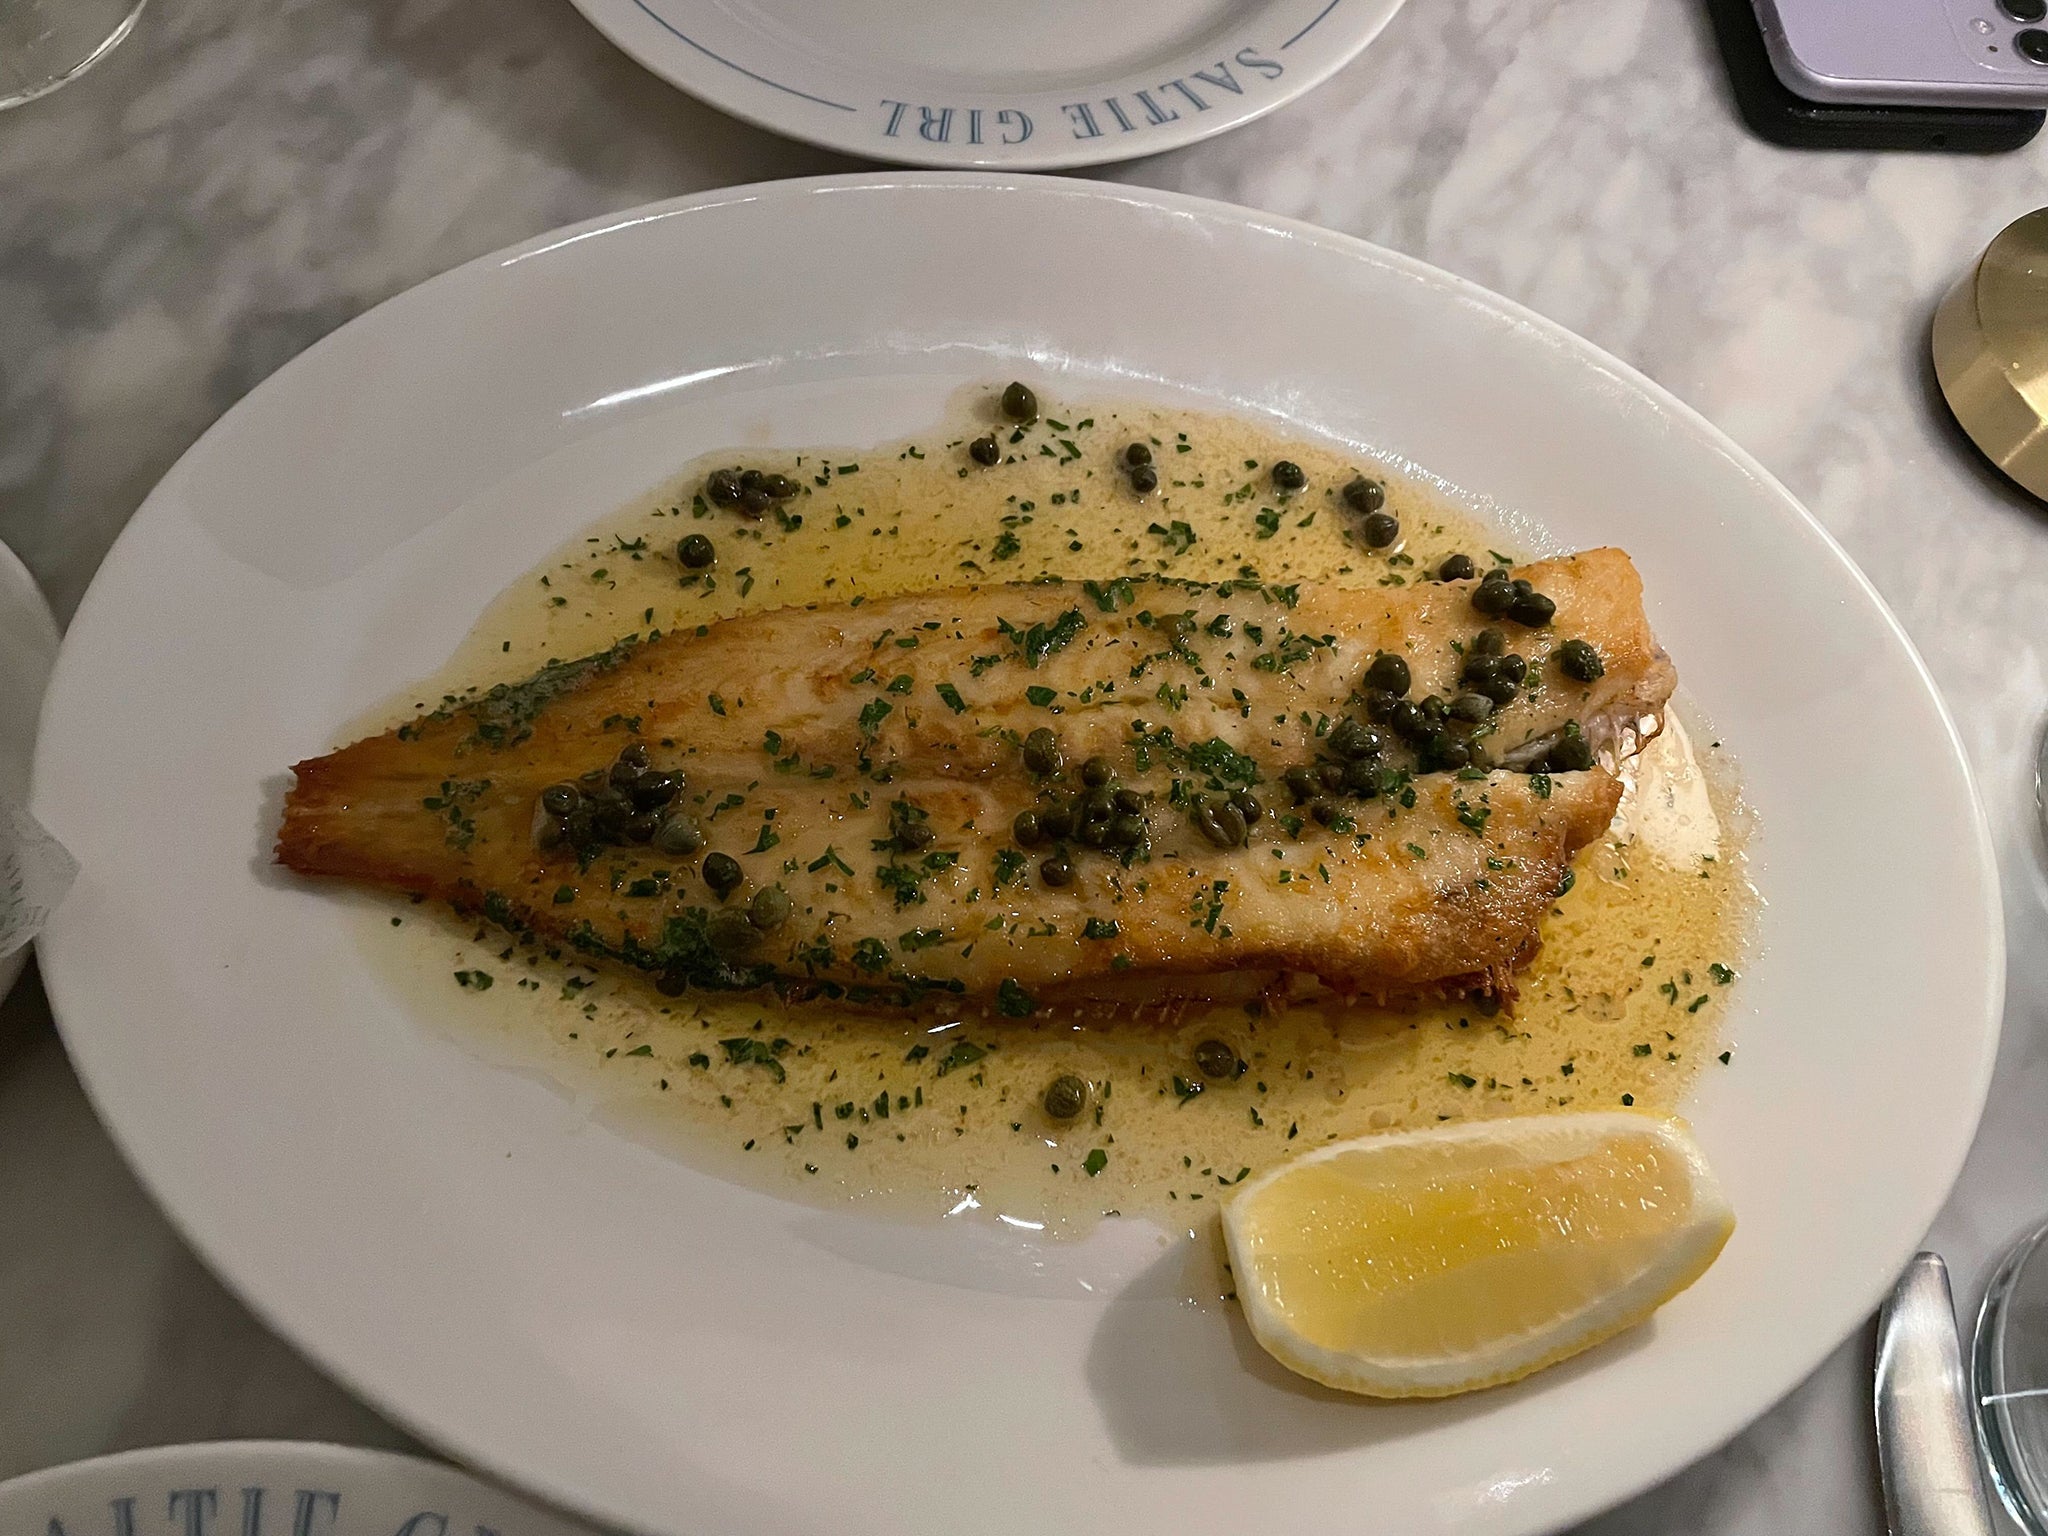 The dover sole meuniere should not be missed